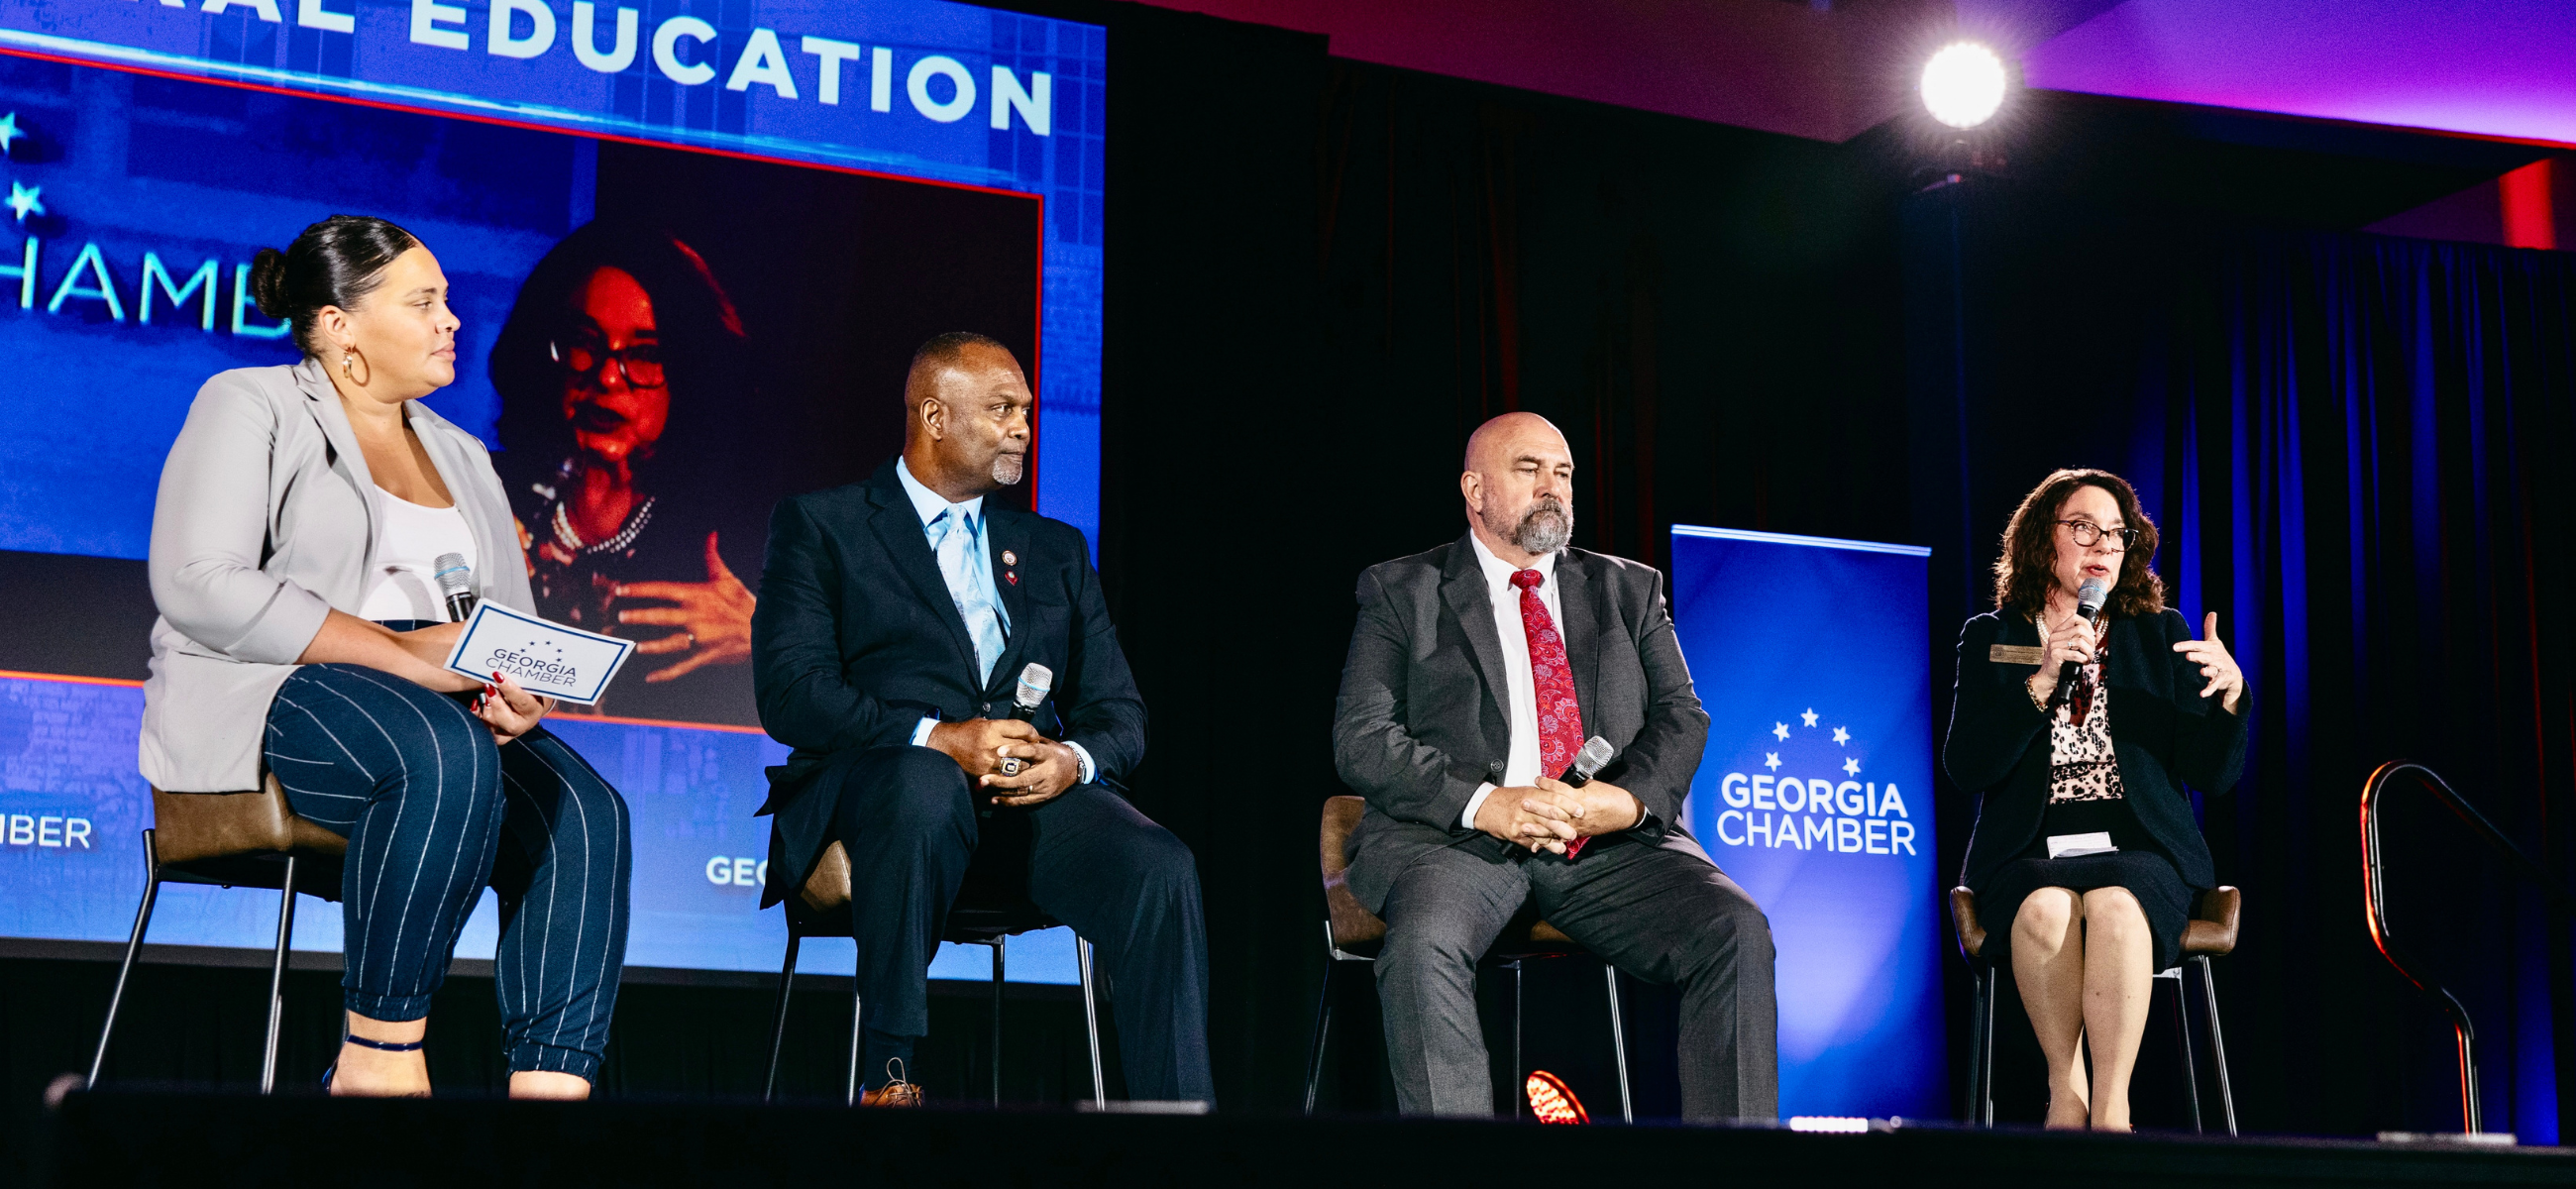 Education leaders present findings at the Georgia Chamber of Commerce Rural Prosperity Summit. (Credit: Georgia Chamber of Commerce)